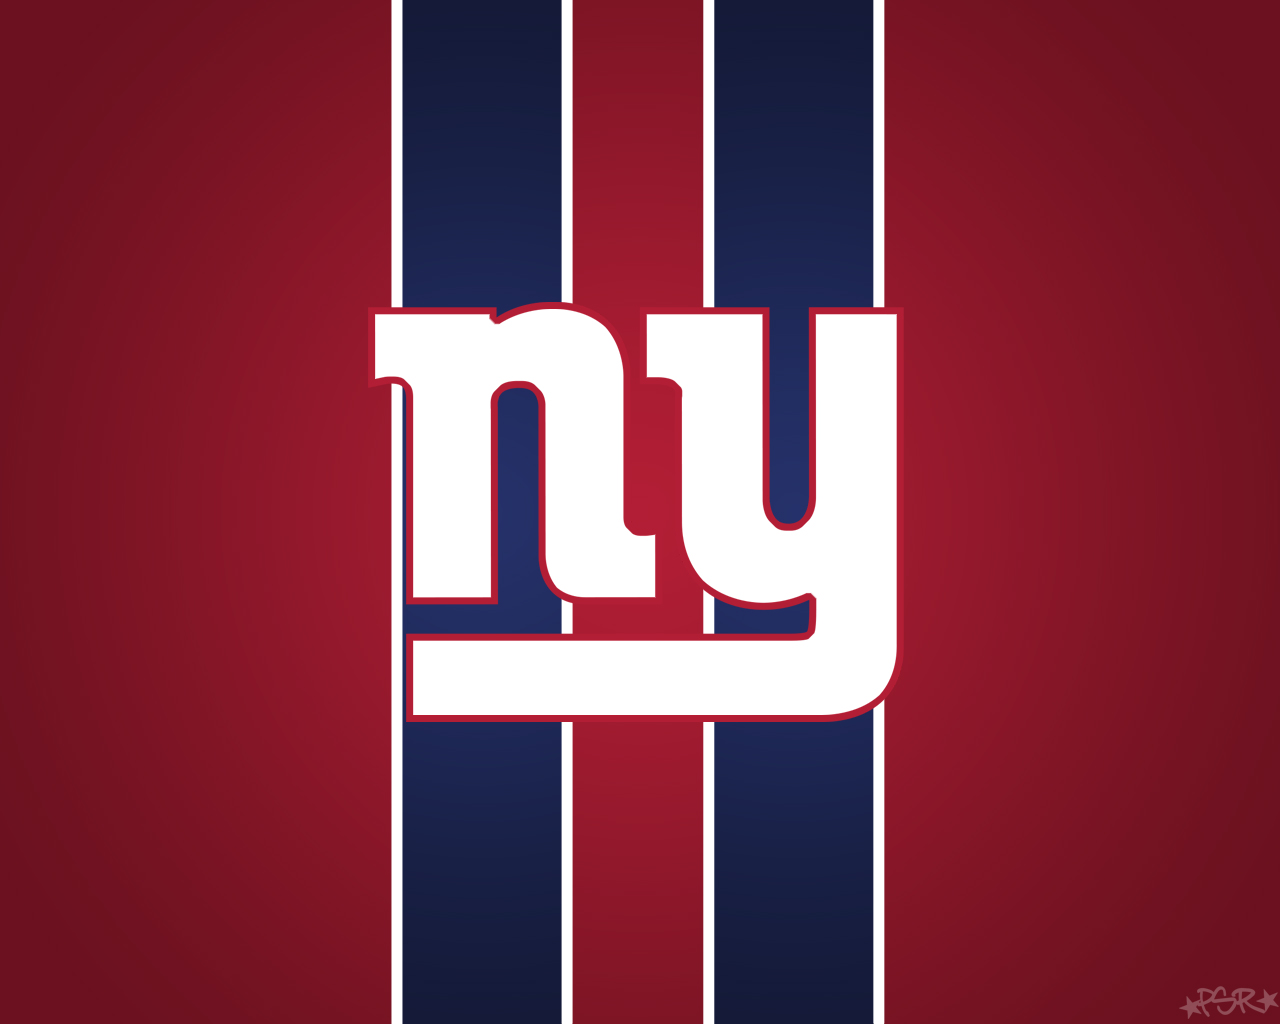 New York Giants Logo w/ Stripes and Red Background (by ~pasar3) | 1280 x 